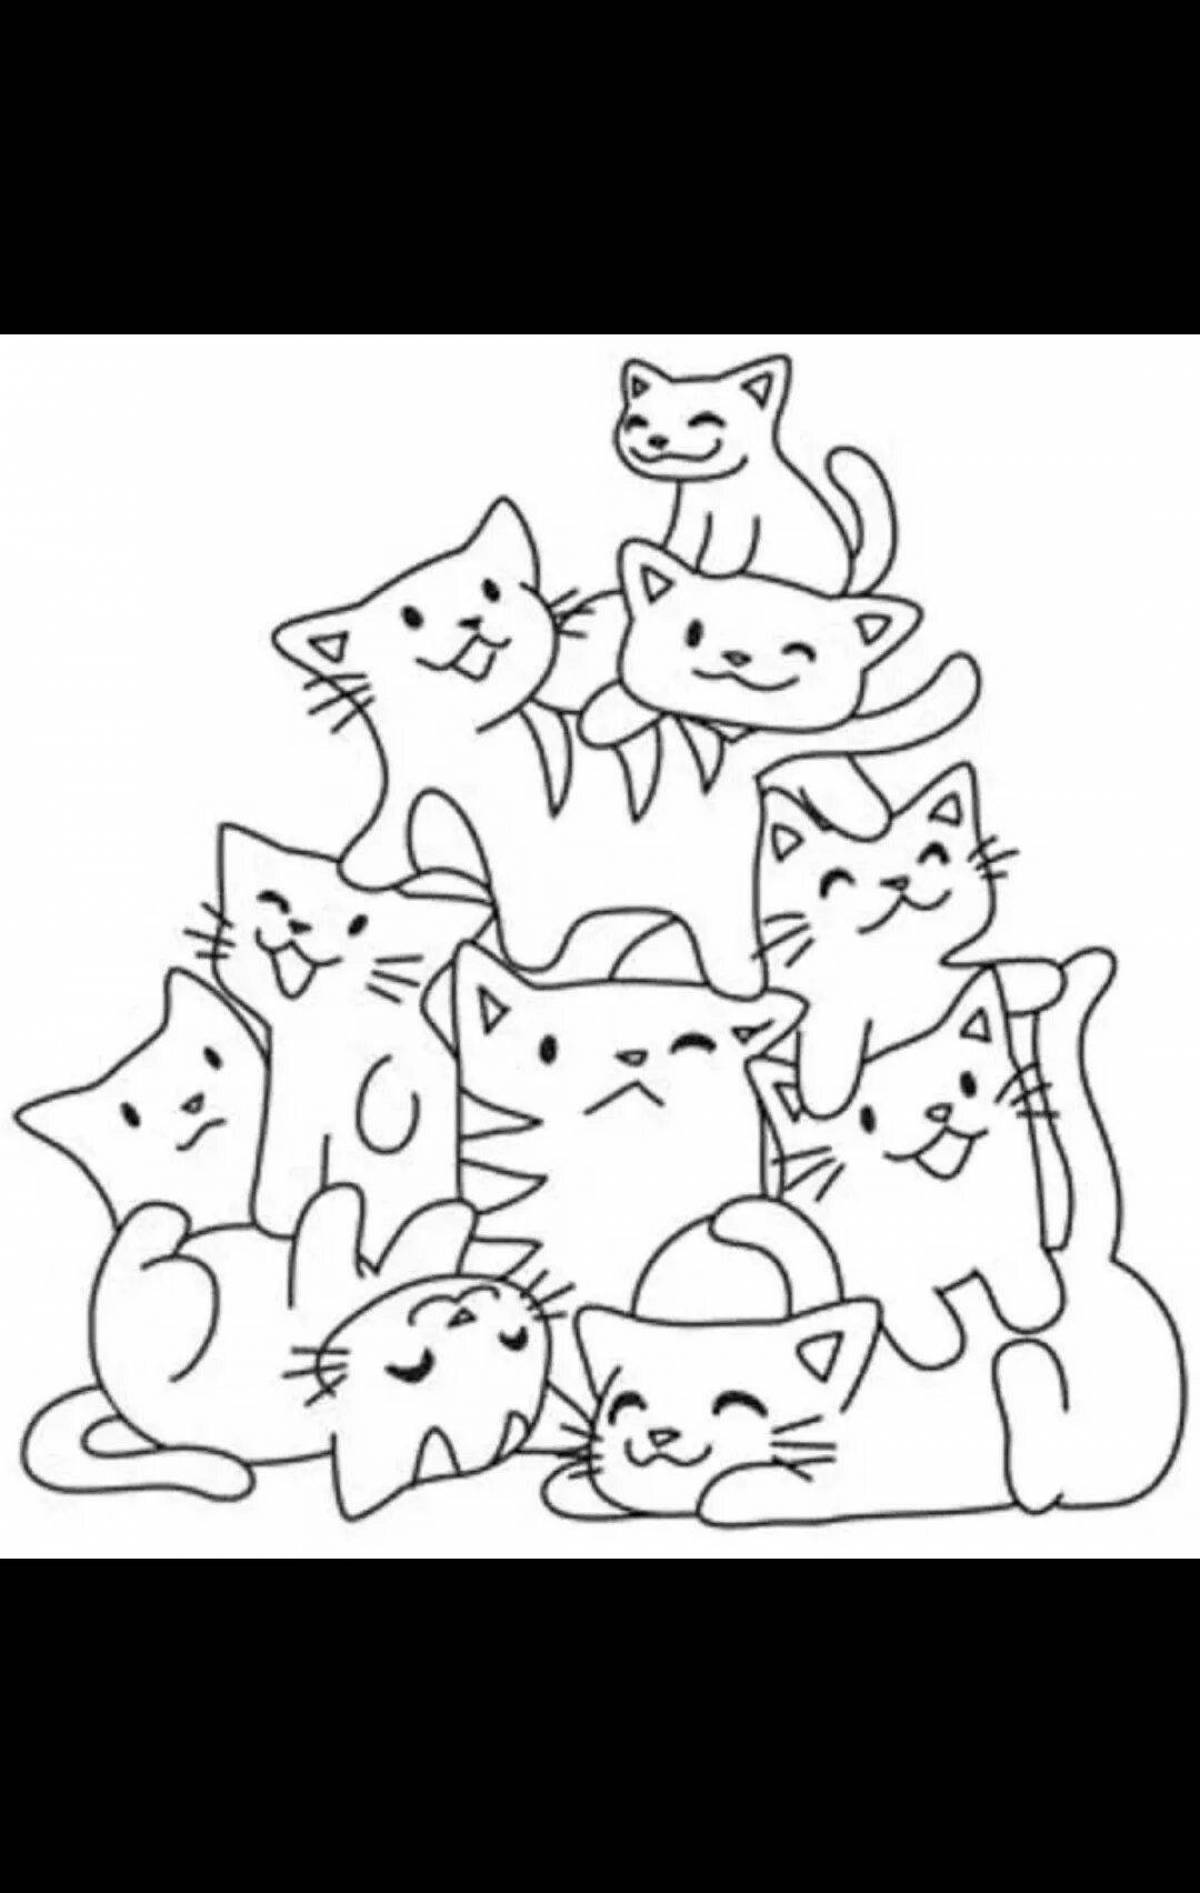 Animating many cats on one page